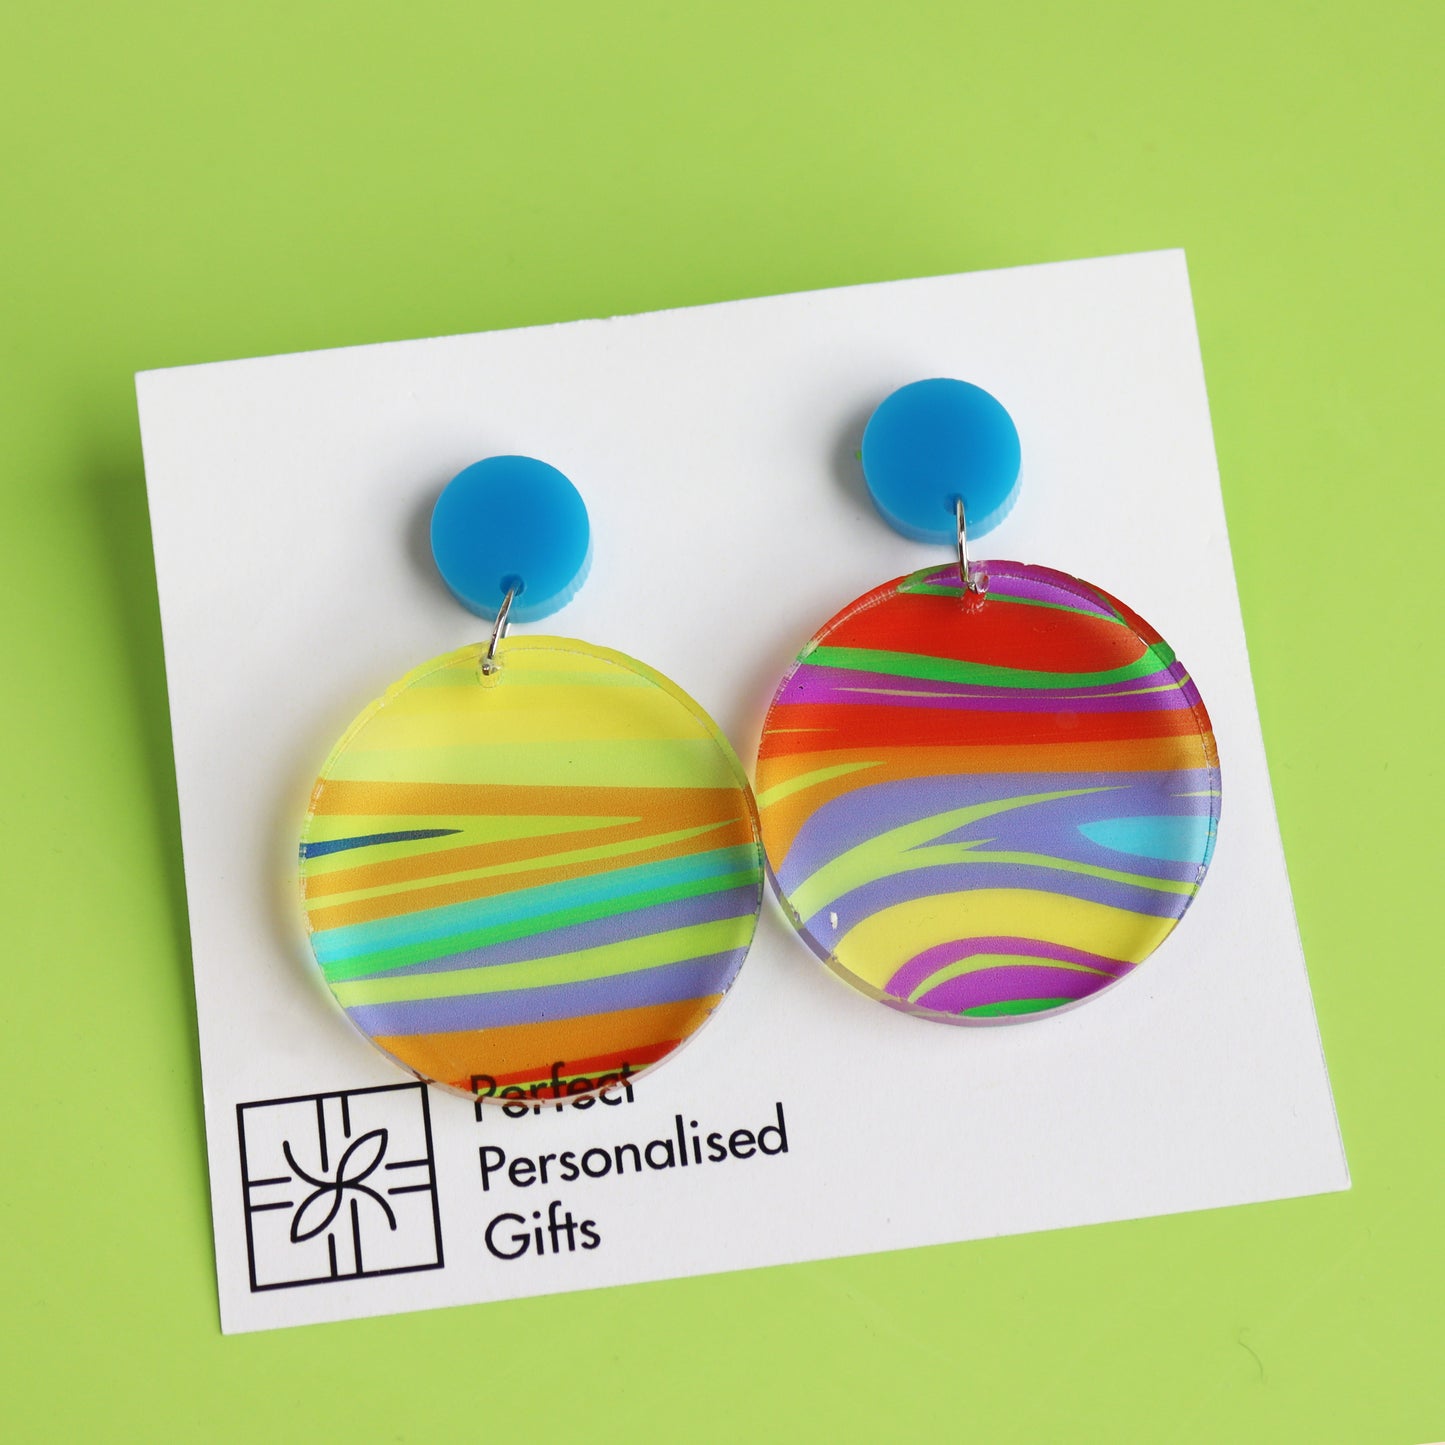 printed acrylic colourful mismatch earrings that have a round blue acrylic stud top and hanging printed acrylic circle hanging on a white card background